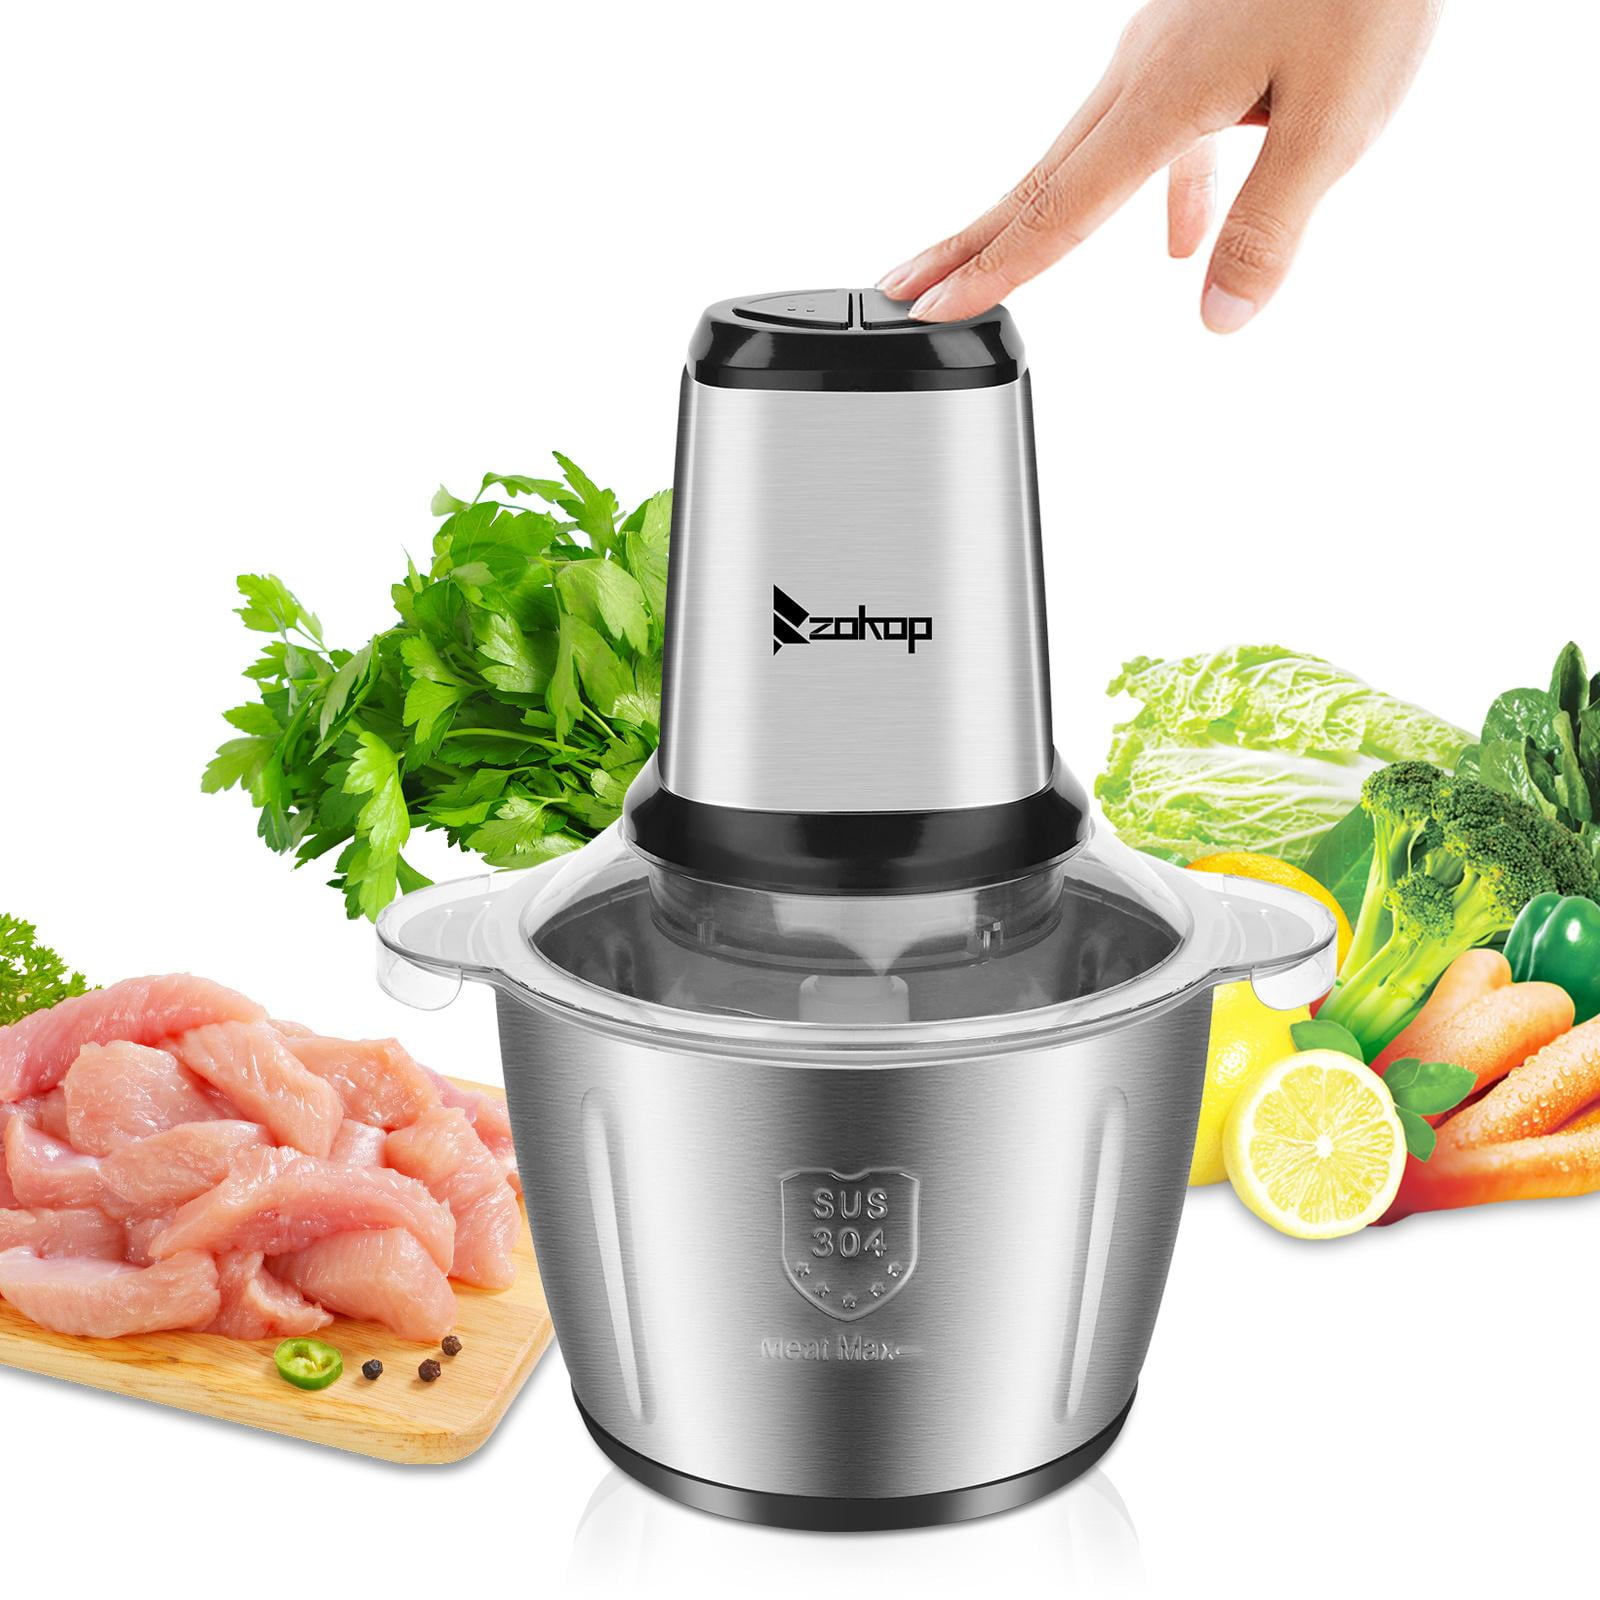 DL-6028 Handheld Wireless Meat Grinder Chopper USB Rechargeable with 4  Bowls Kitchen Stand Mixer Vegetable Meat Seasoning